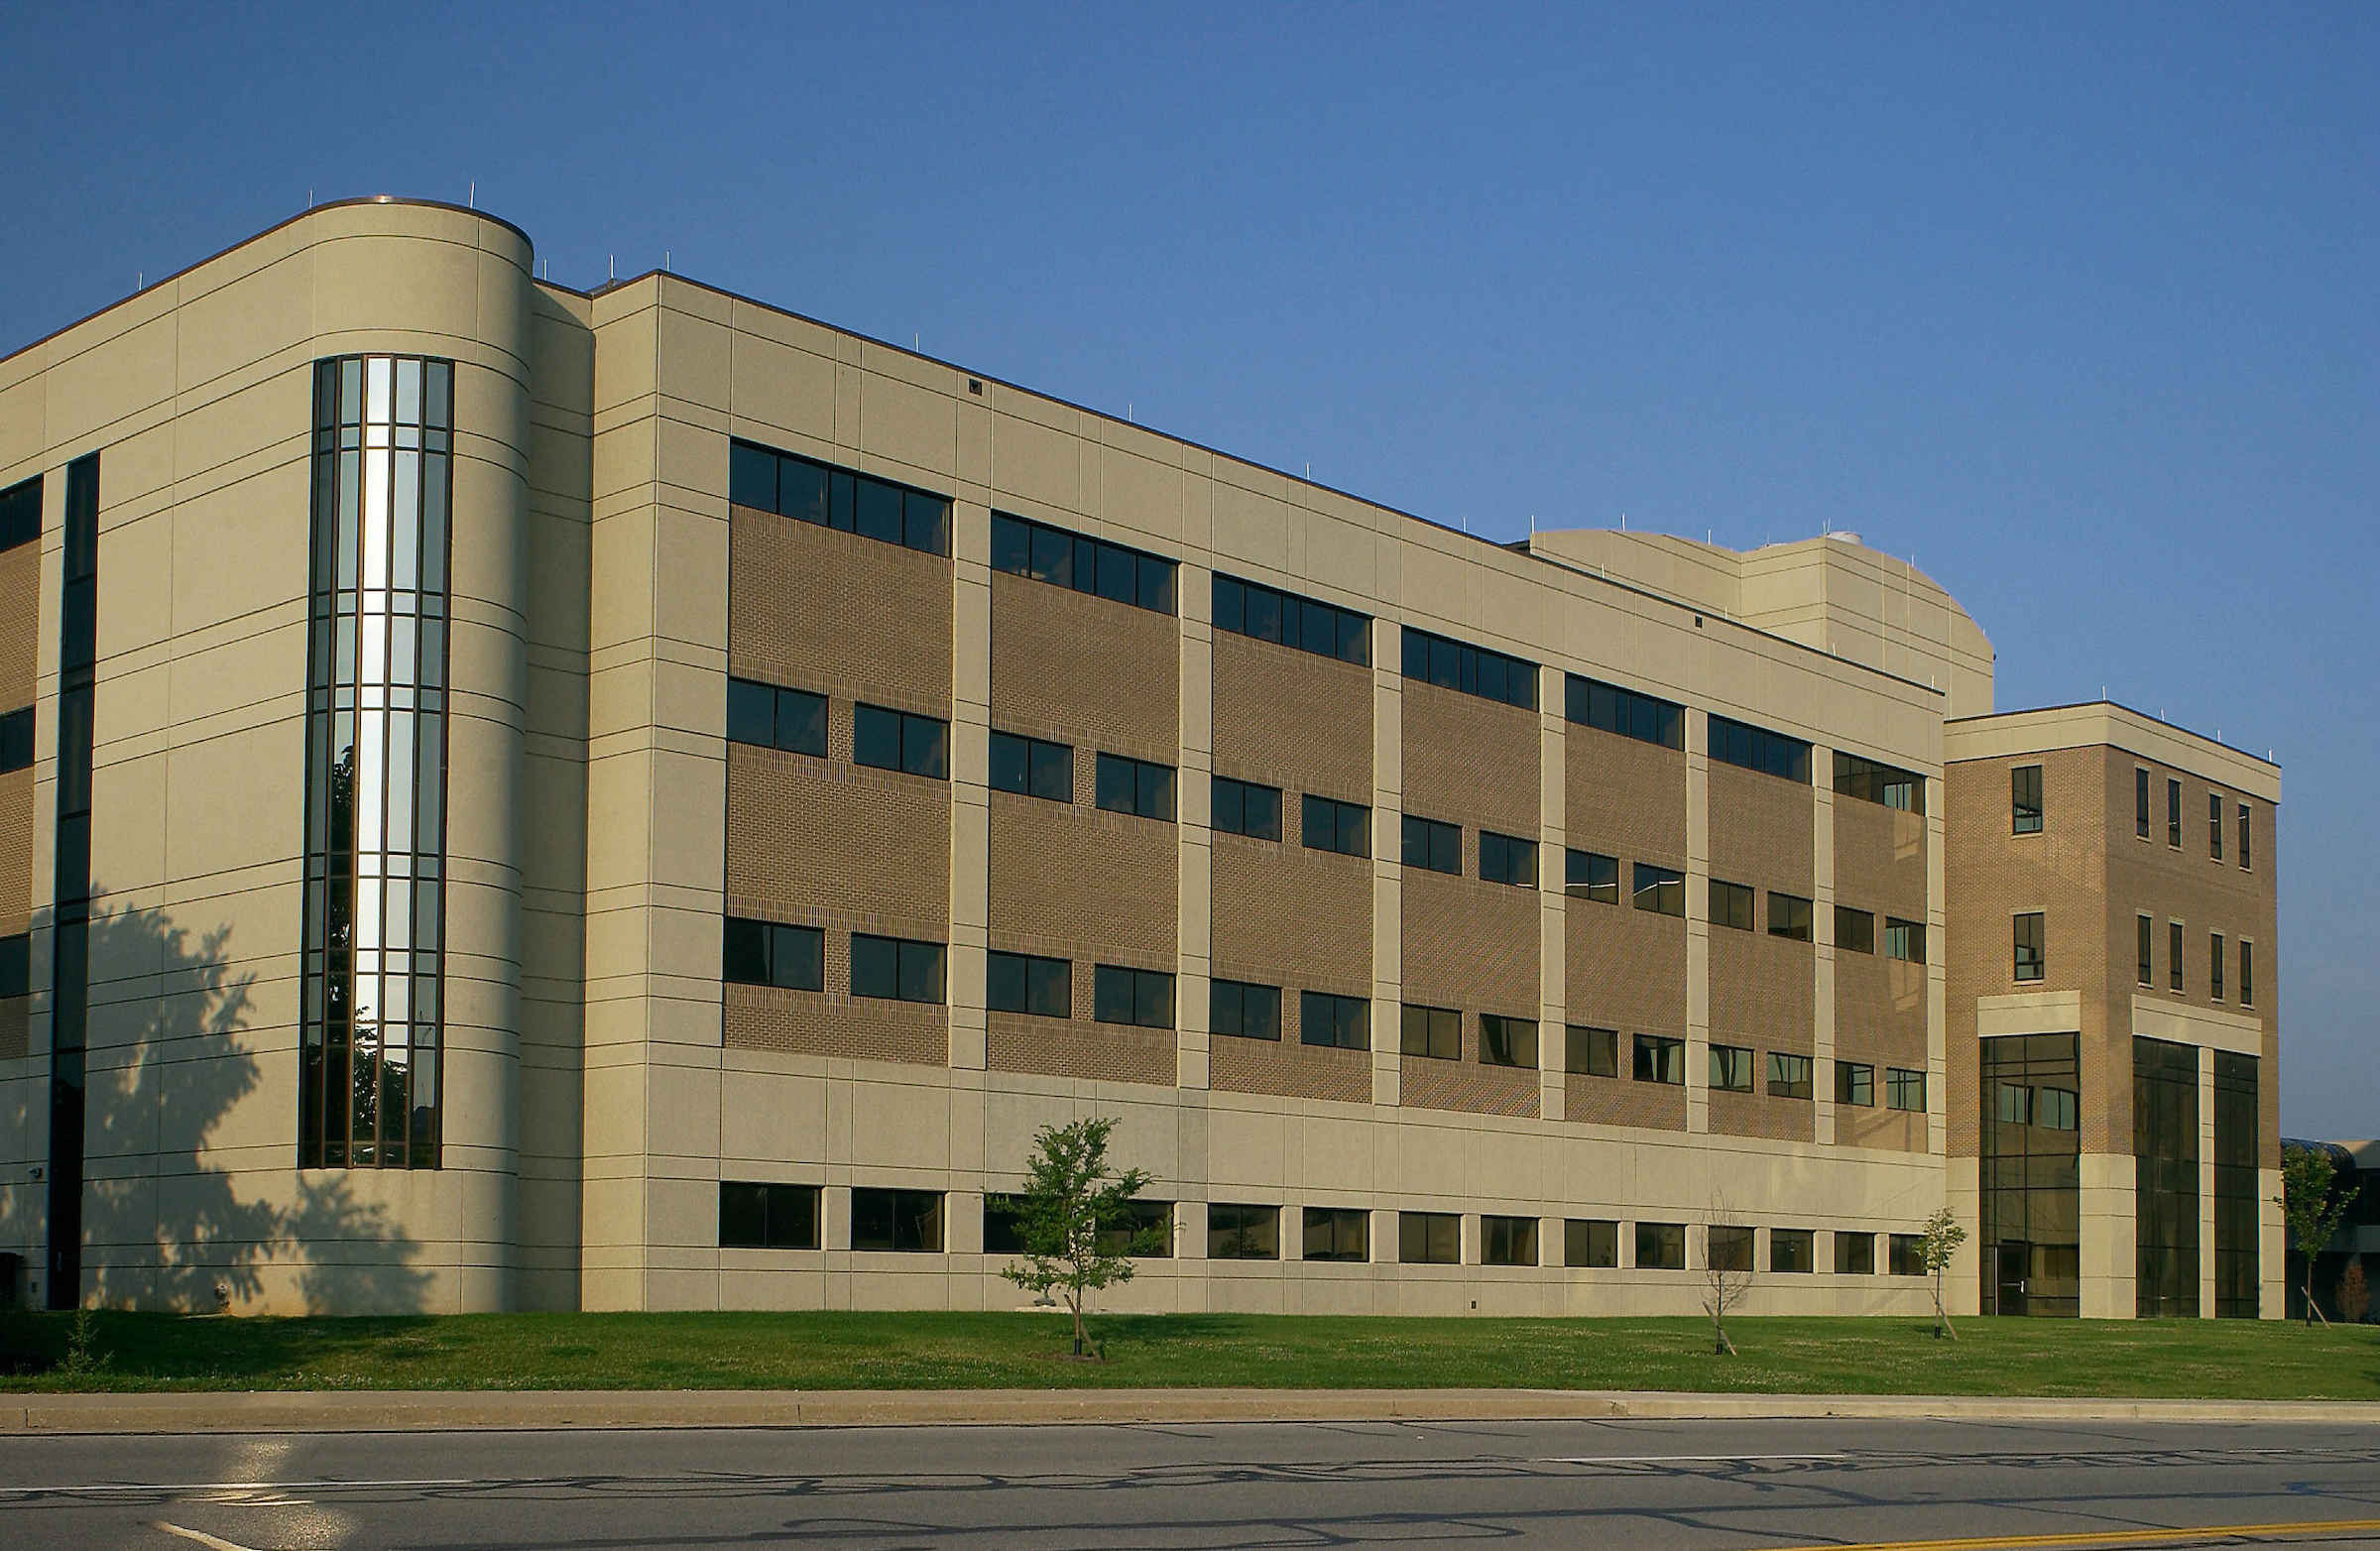 The Plant Science Building